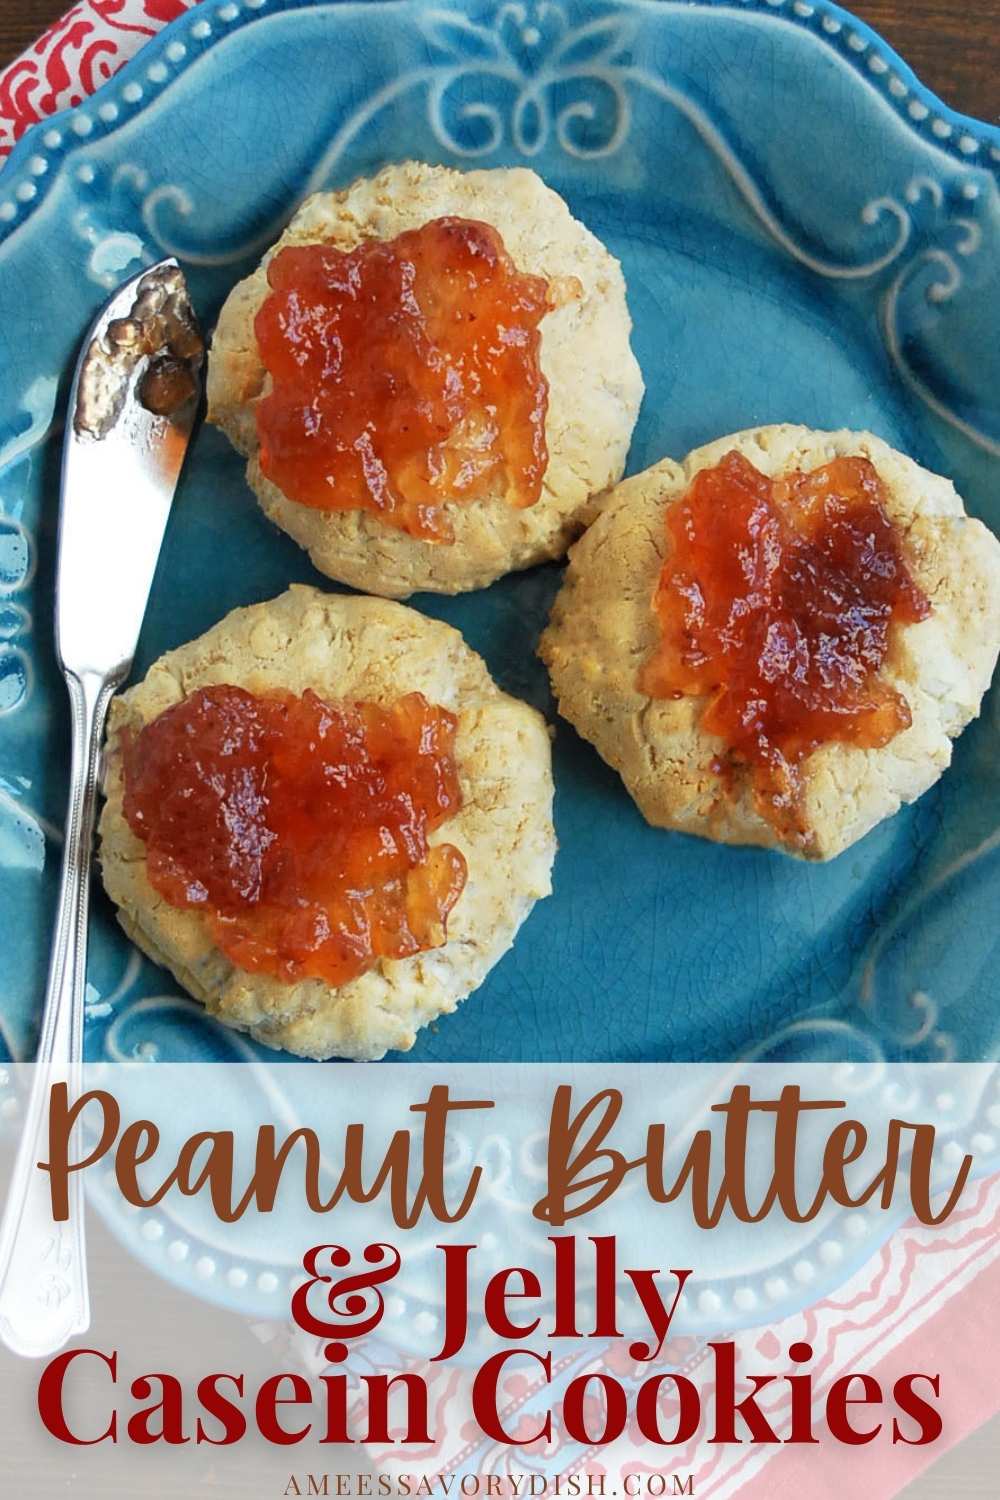 Peanut Butter and Jelly Casein Protein Cookies are a delicious and easy gluten-free protein cookie made with creamy peanut butter and all-fruit preserves. #caseinrecipe #proteincookies #proteindessert via @Ameessavorydish